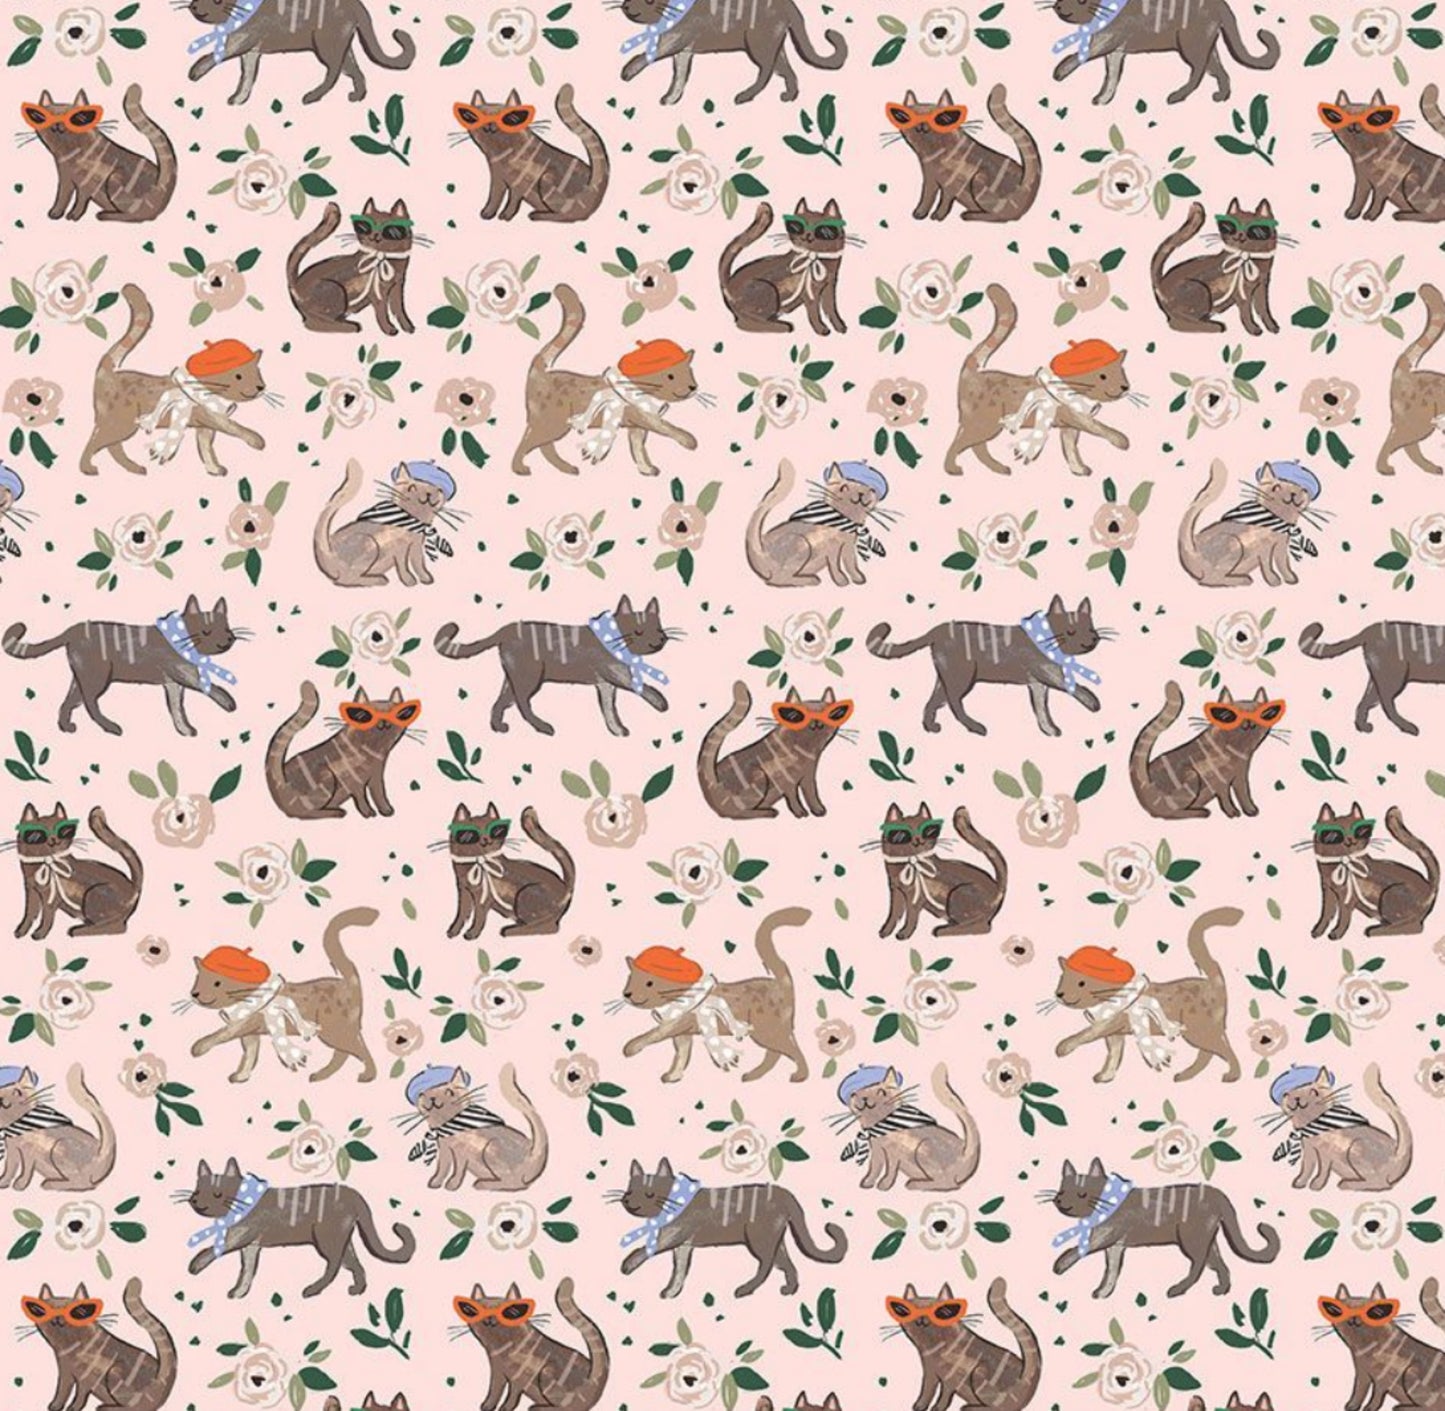 French Cats - Ma Belle Collection by C lara Jean for Dear Stella Fabrics in Blush